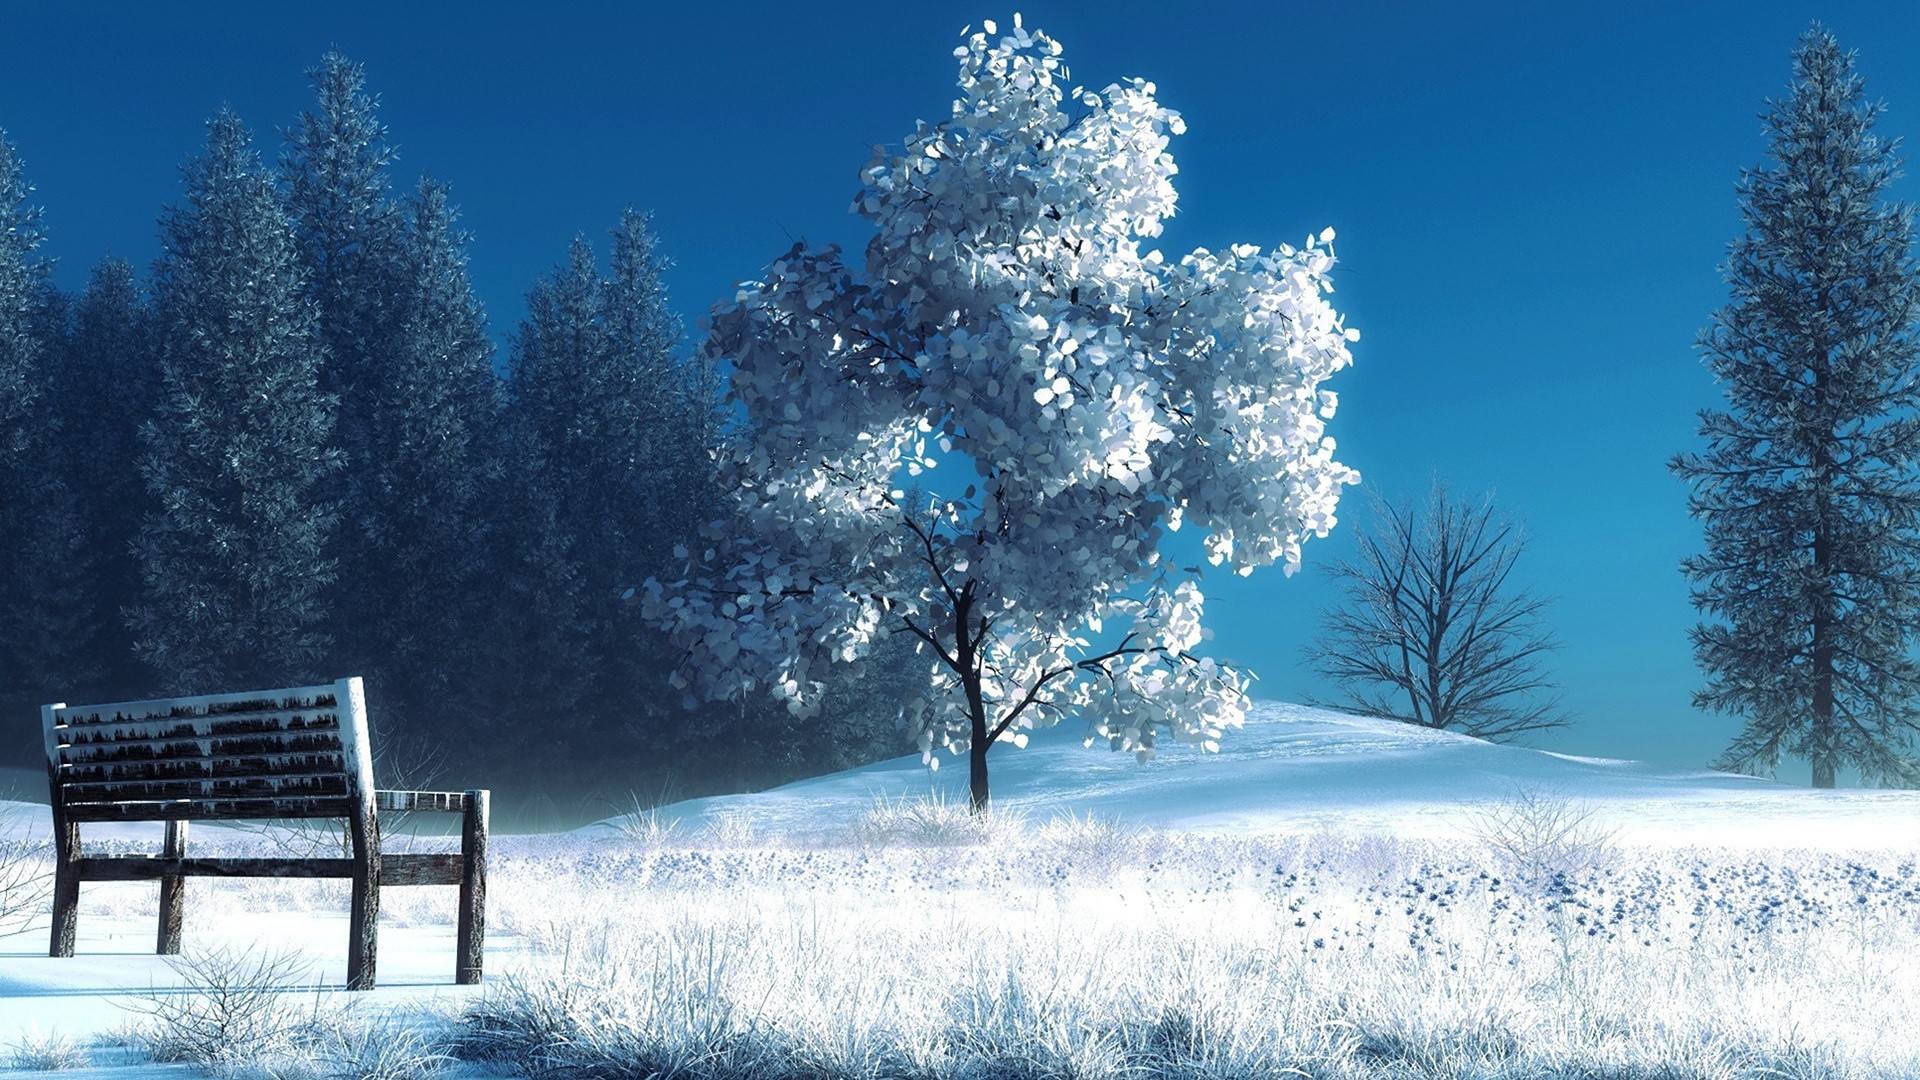 General 1920x1080 winter snow trees nature cold bench outdoors artwork